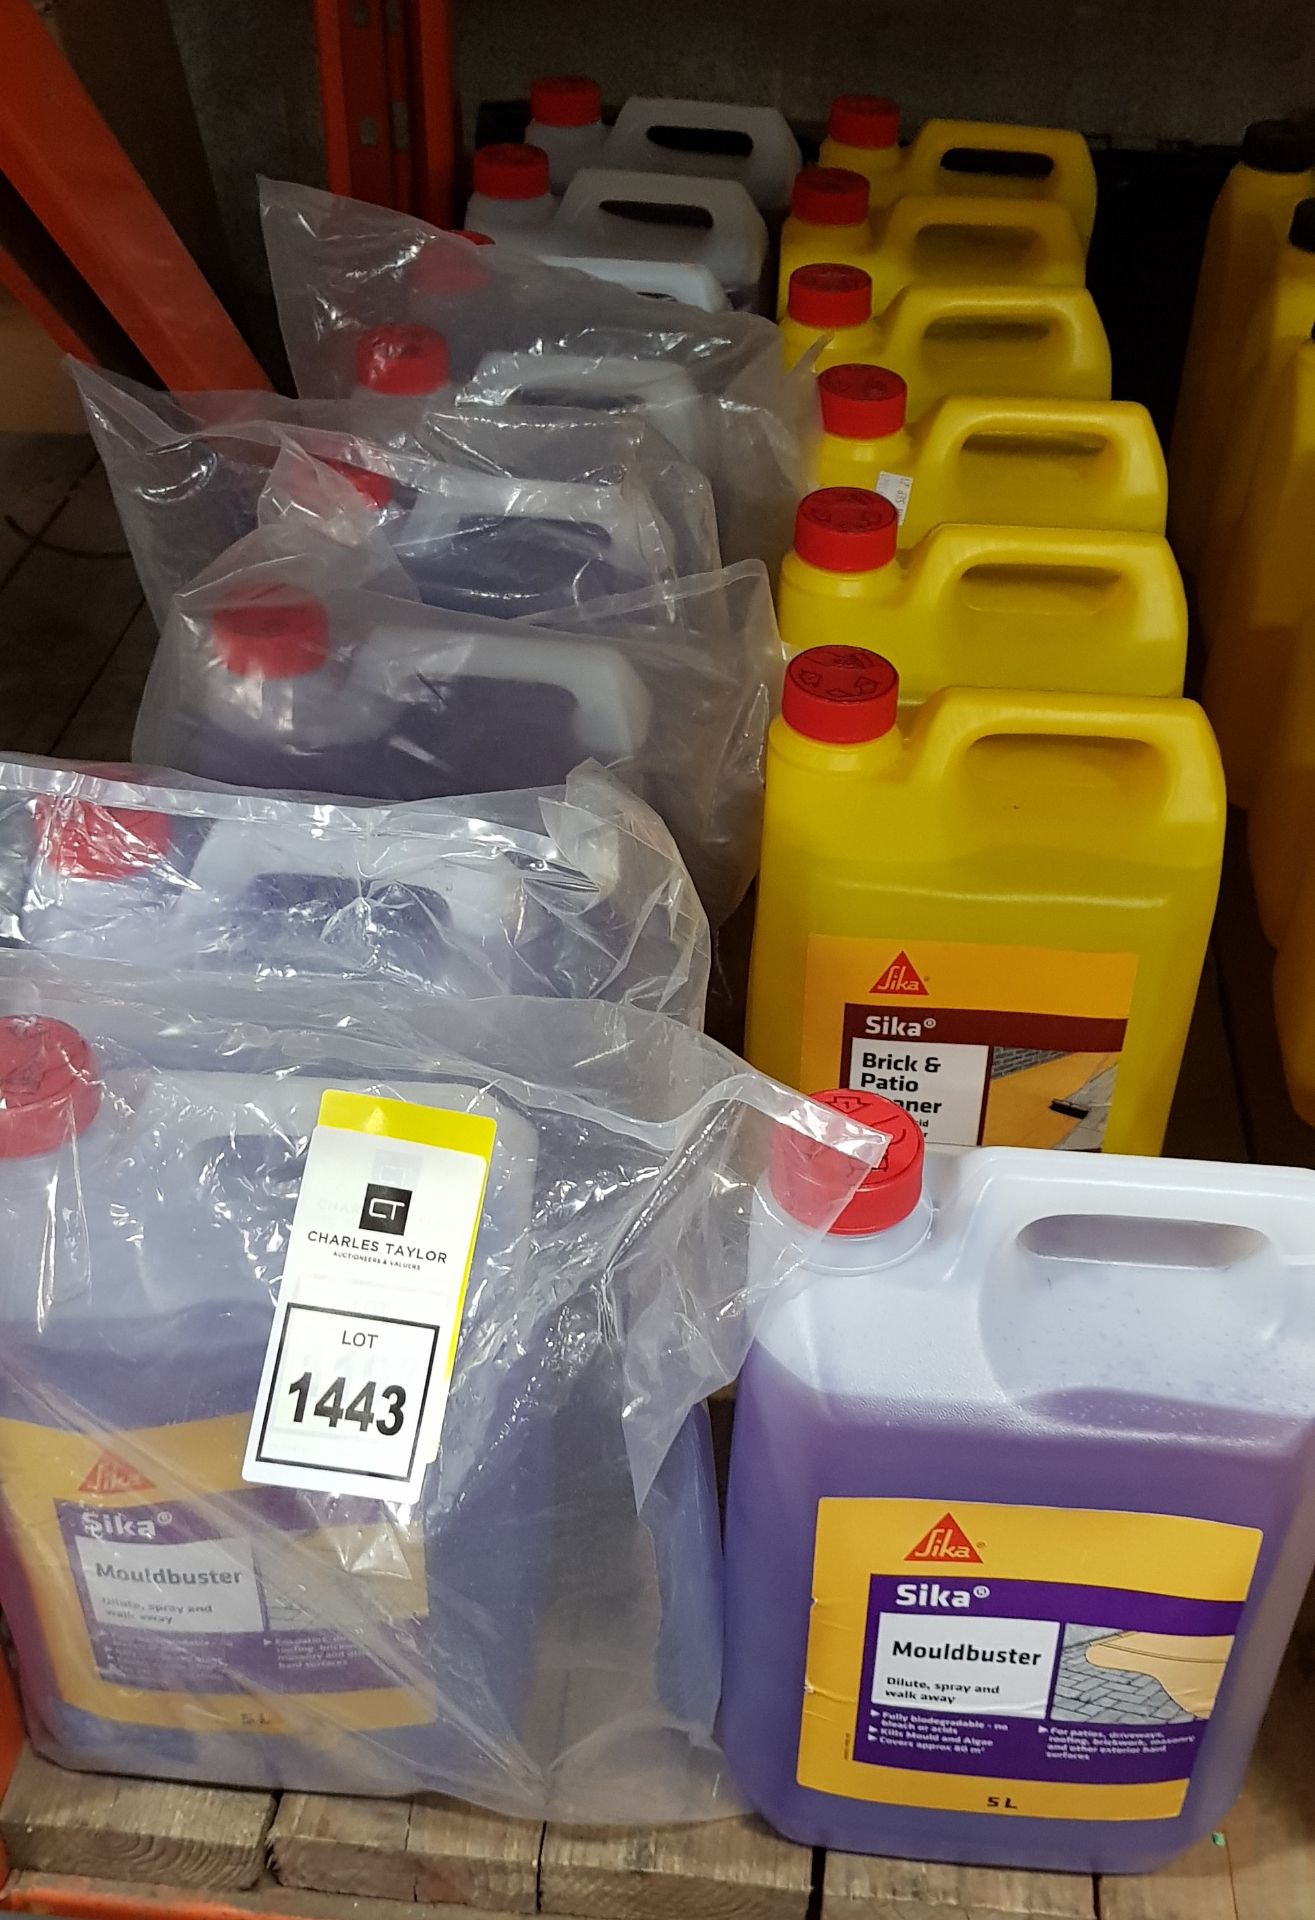 15 X MIXED LOT TO INCLUDE 9 X BRAND NEW SILKA MOULD BUSTER DILUTE SPRAY AND WALK AWAY , AND 6 X